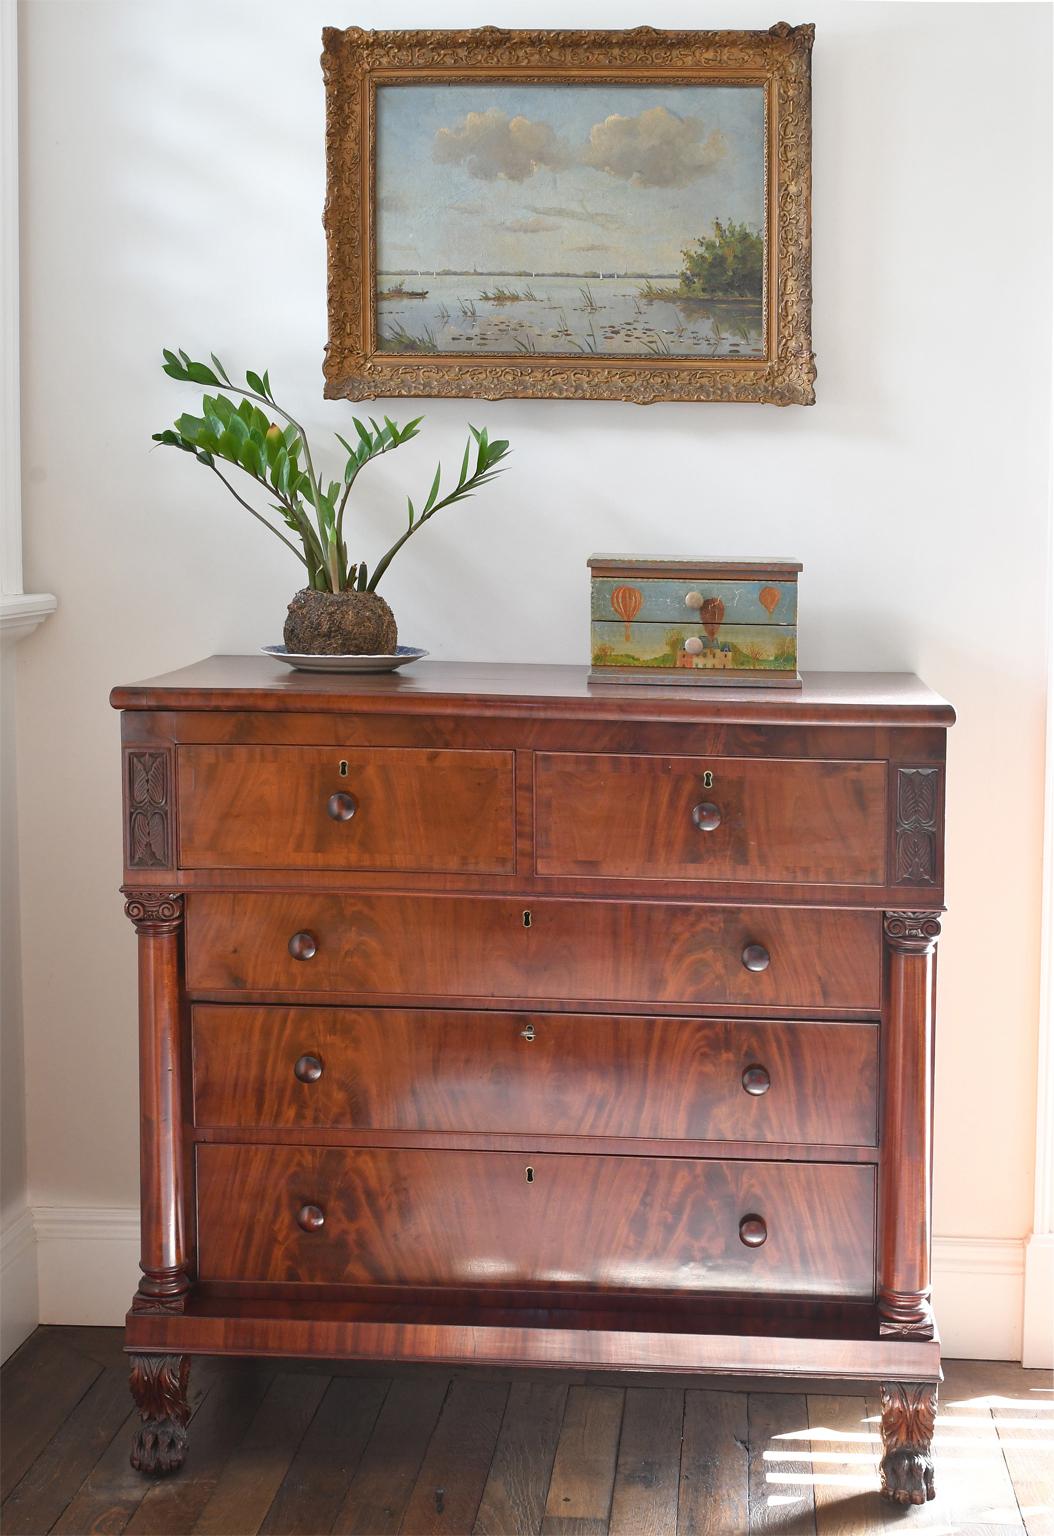 Philadelphia federal chest of drawers in mahogany, American, circa 1815. Full column with well-articulated carvings, including capitals and feet. Original wood knobs, banded drawer fronts and working locks. Bookmatched crotch mahogany veneer over